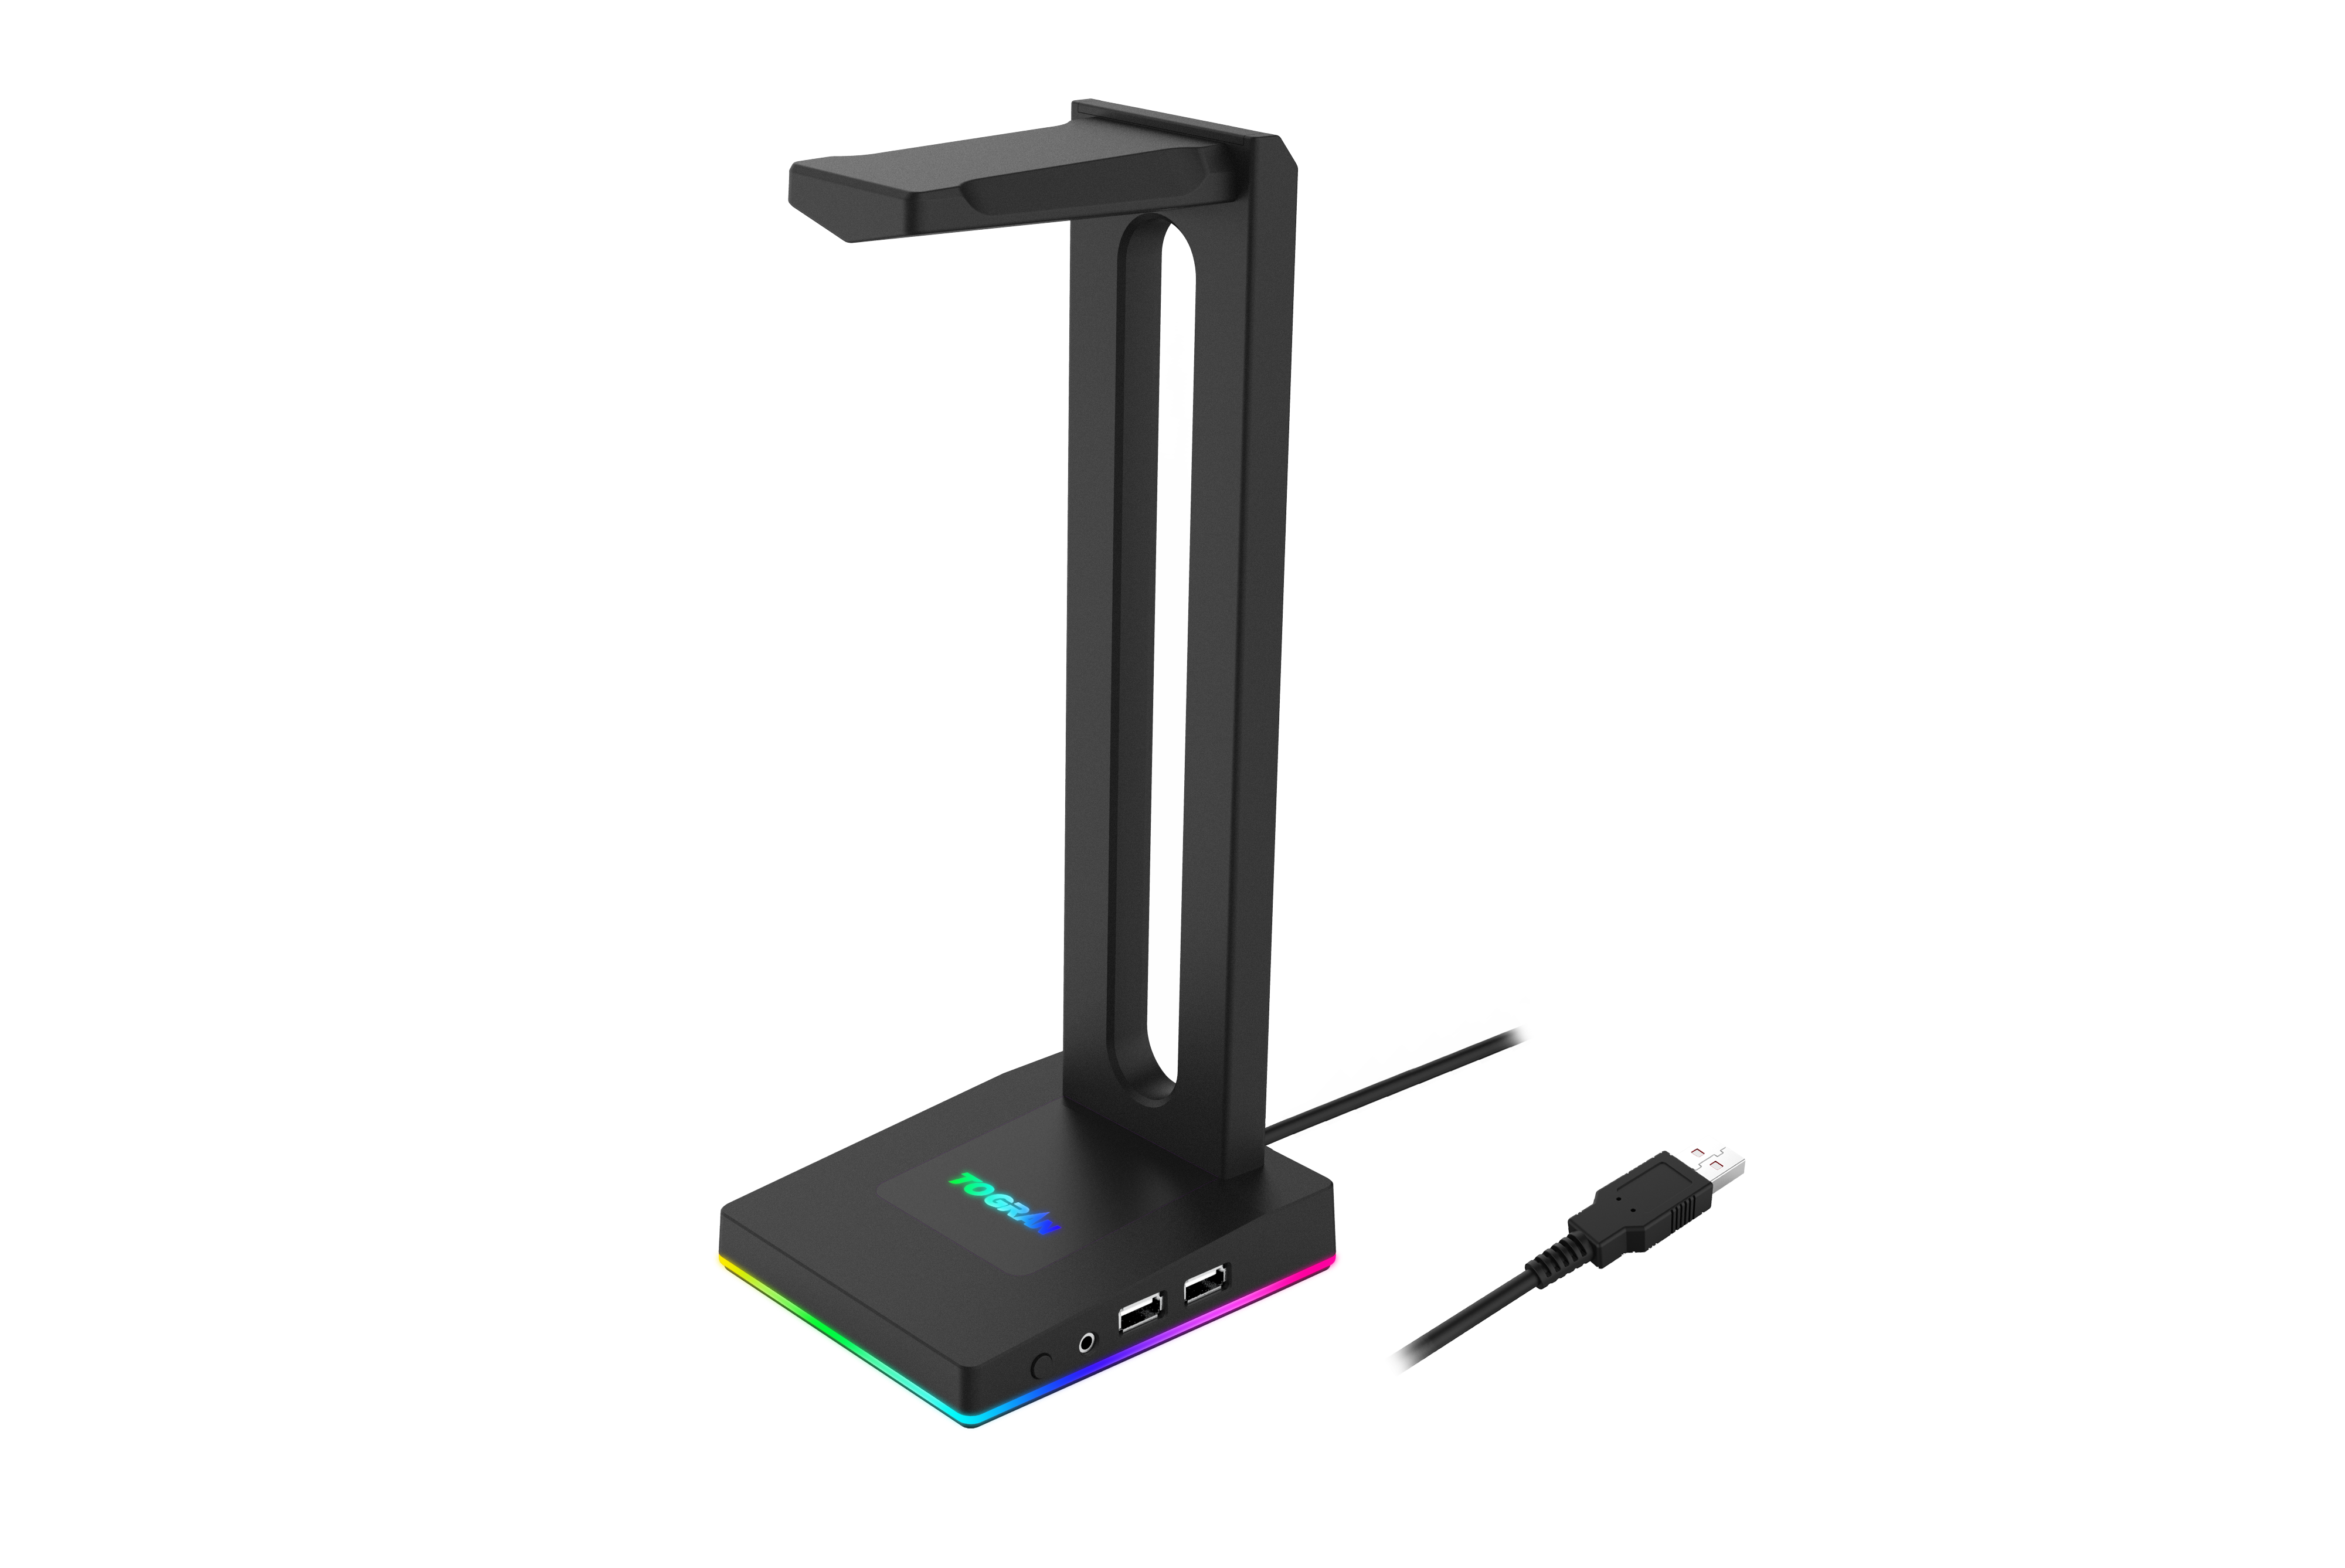 TH630U RGB Headphones Stand with 3.5mm AUX and 2 USB Ports, Headphone Holder for Gamers Gaming PC Accessories Desk